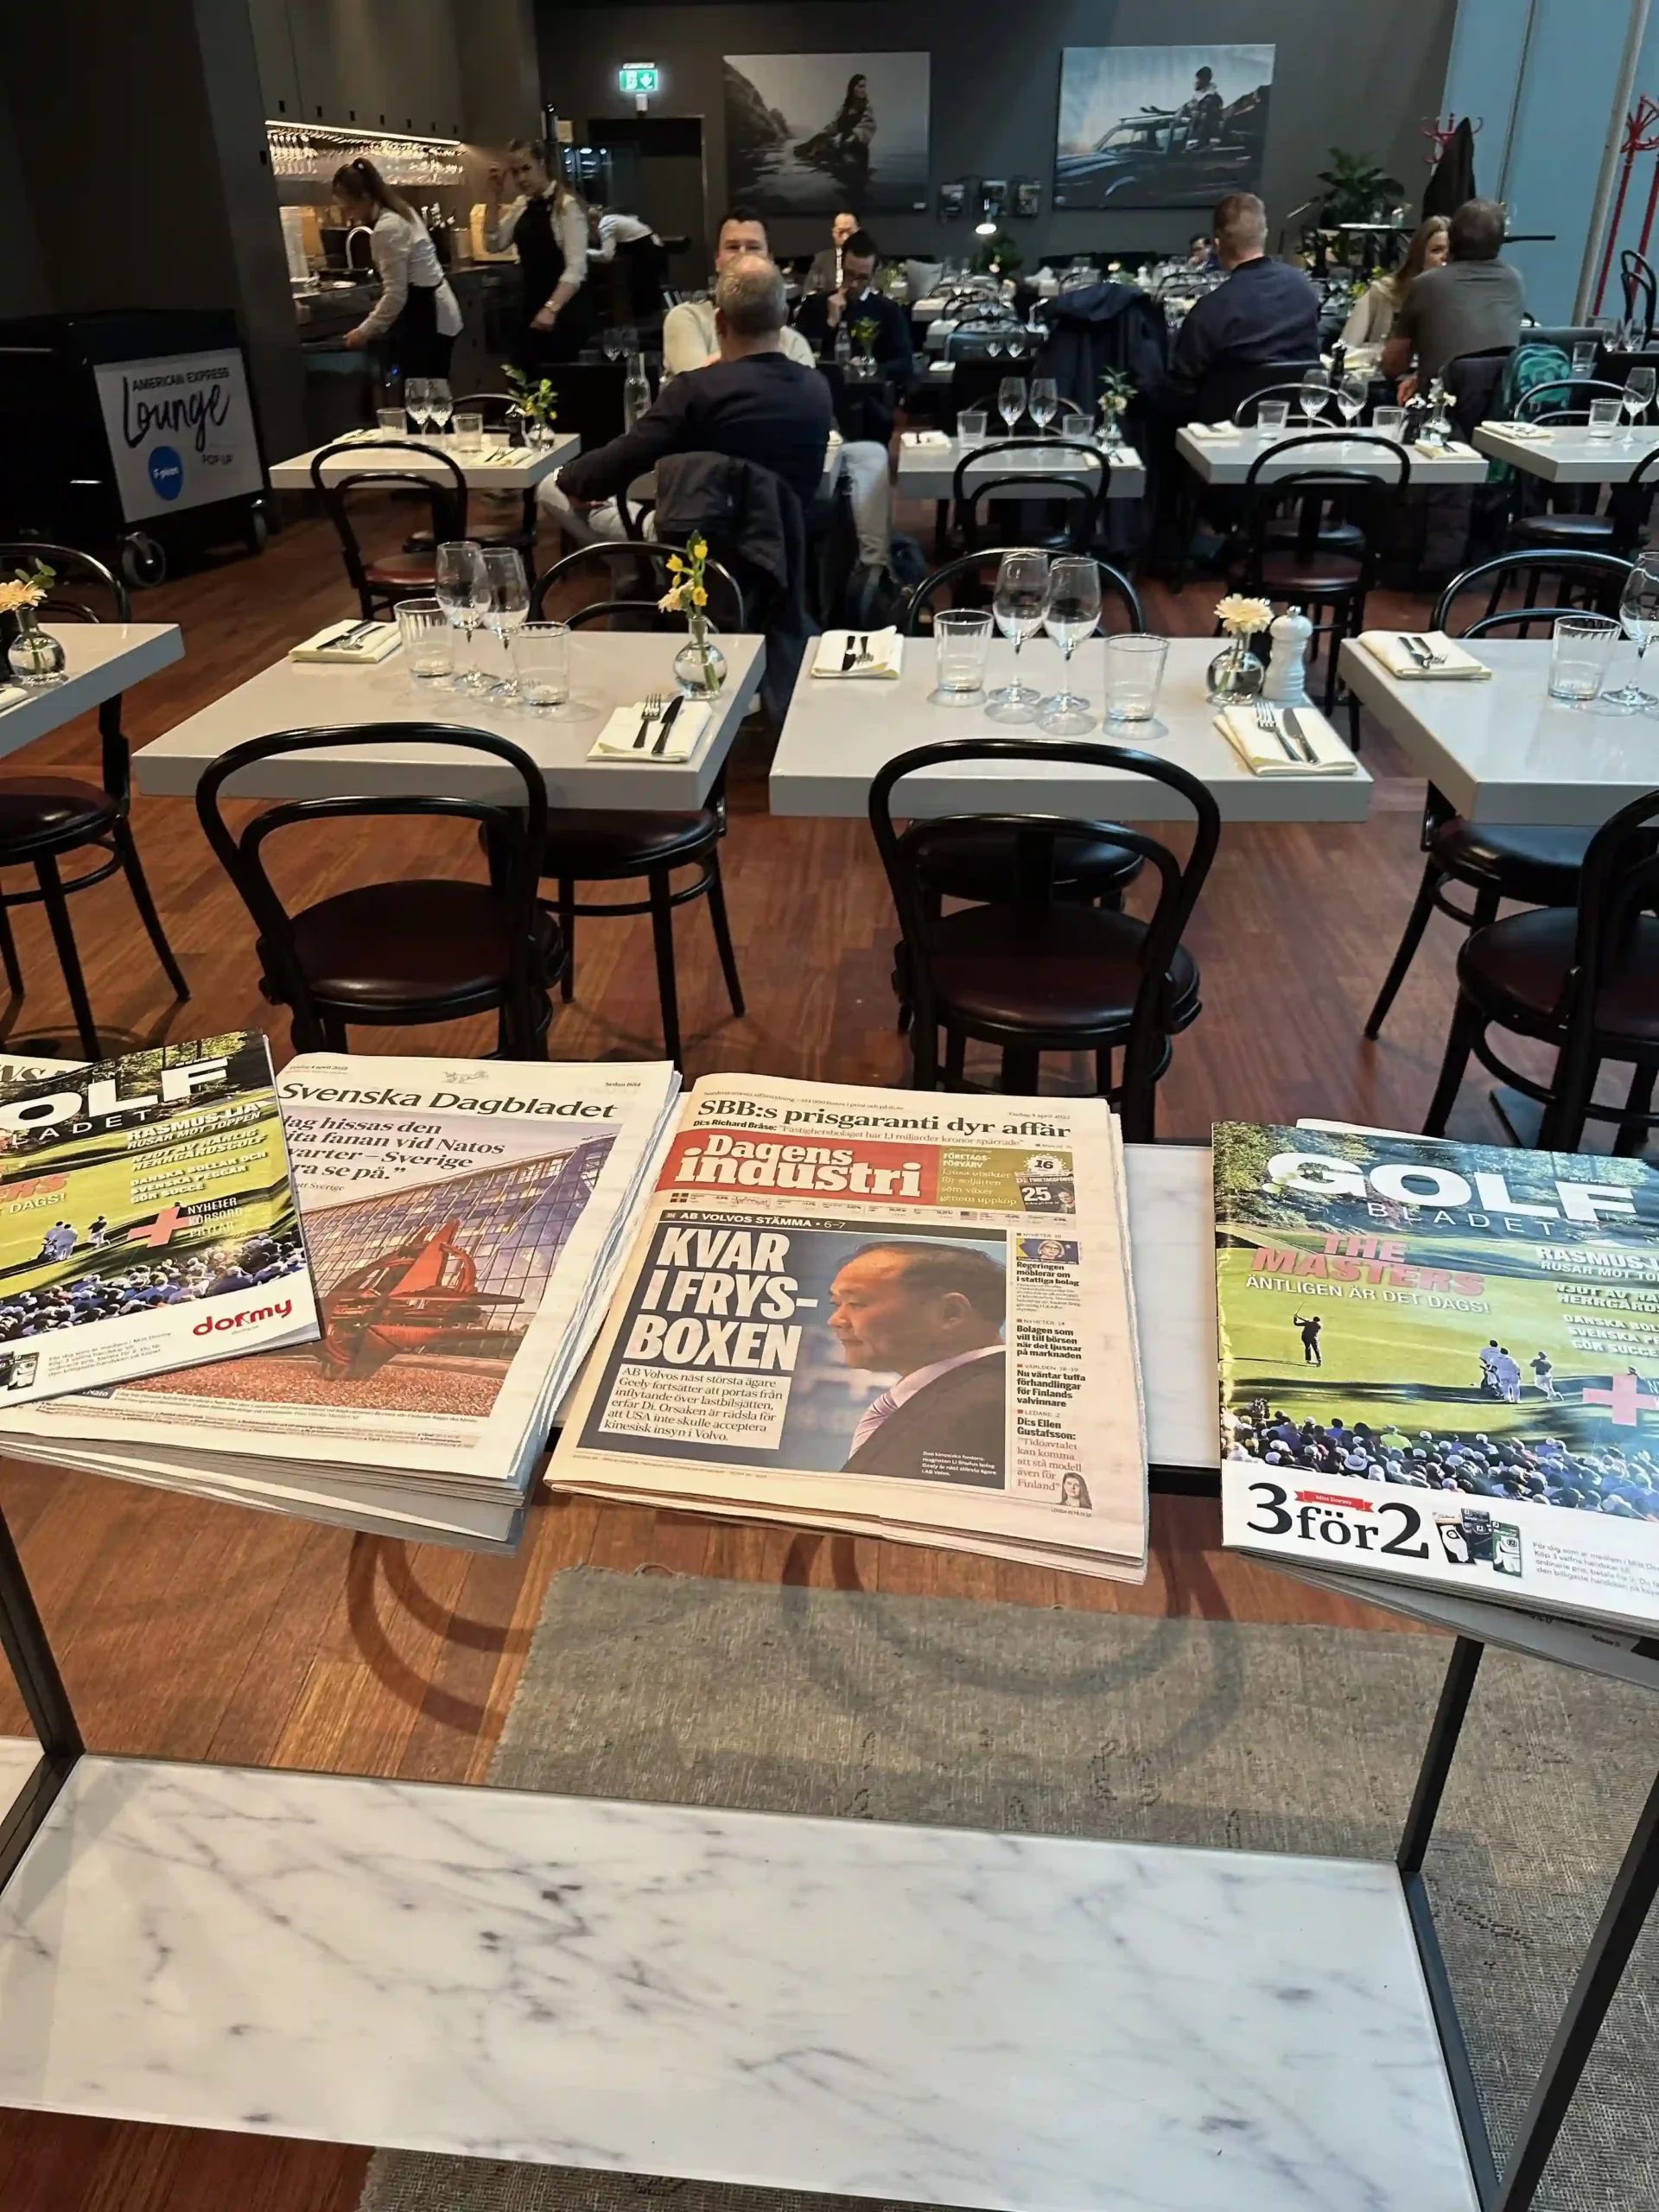 a group of people sitting at tables with magazines and glasses